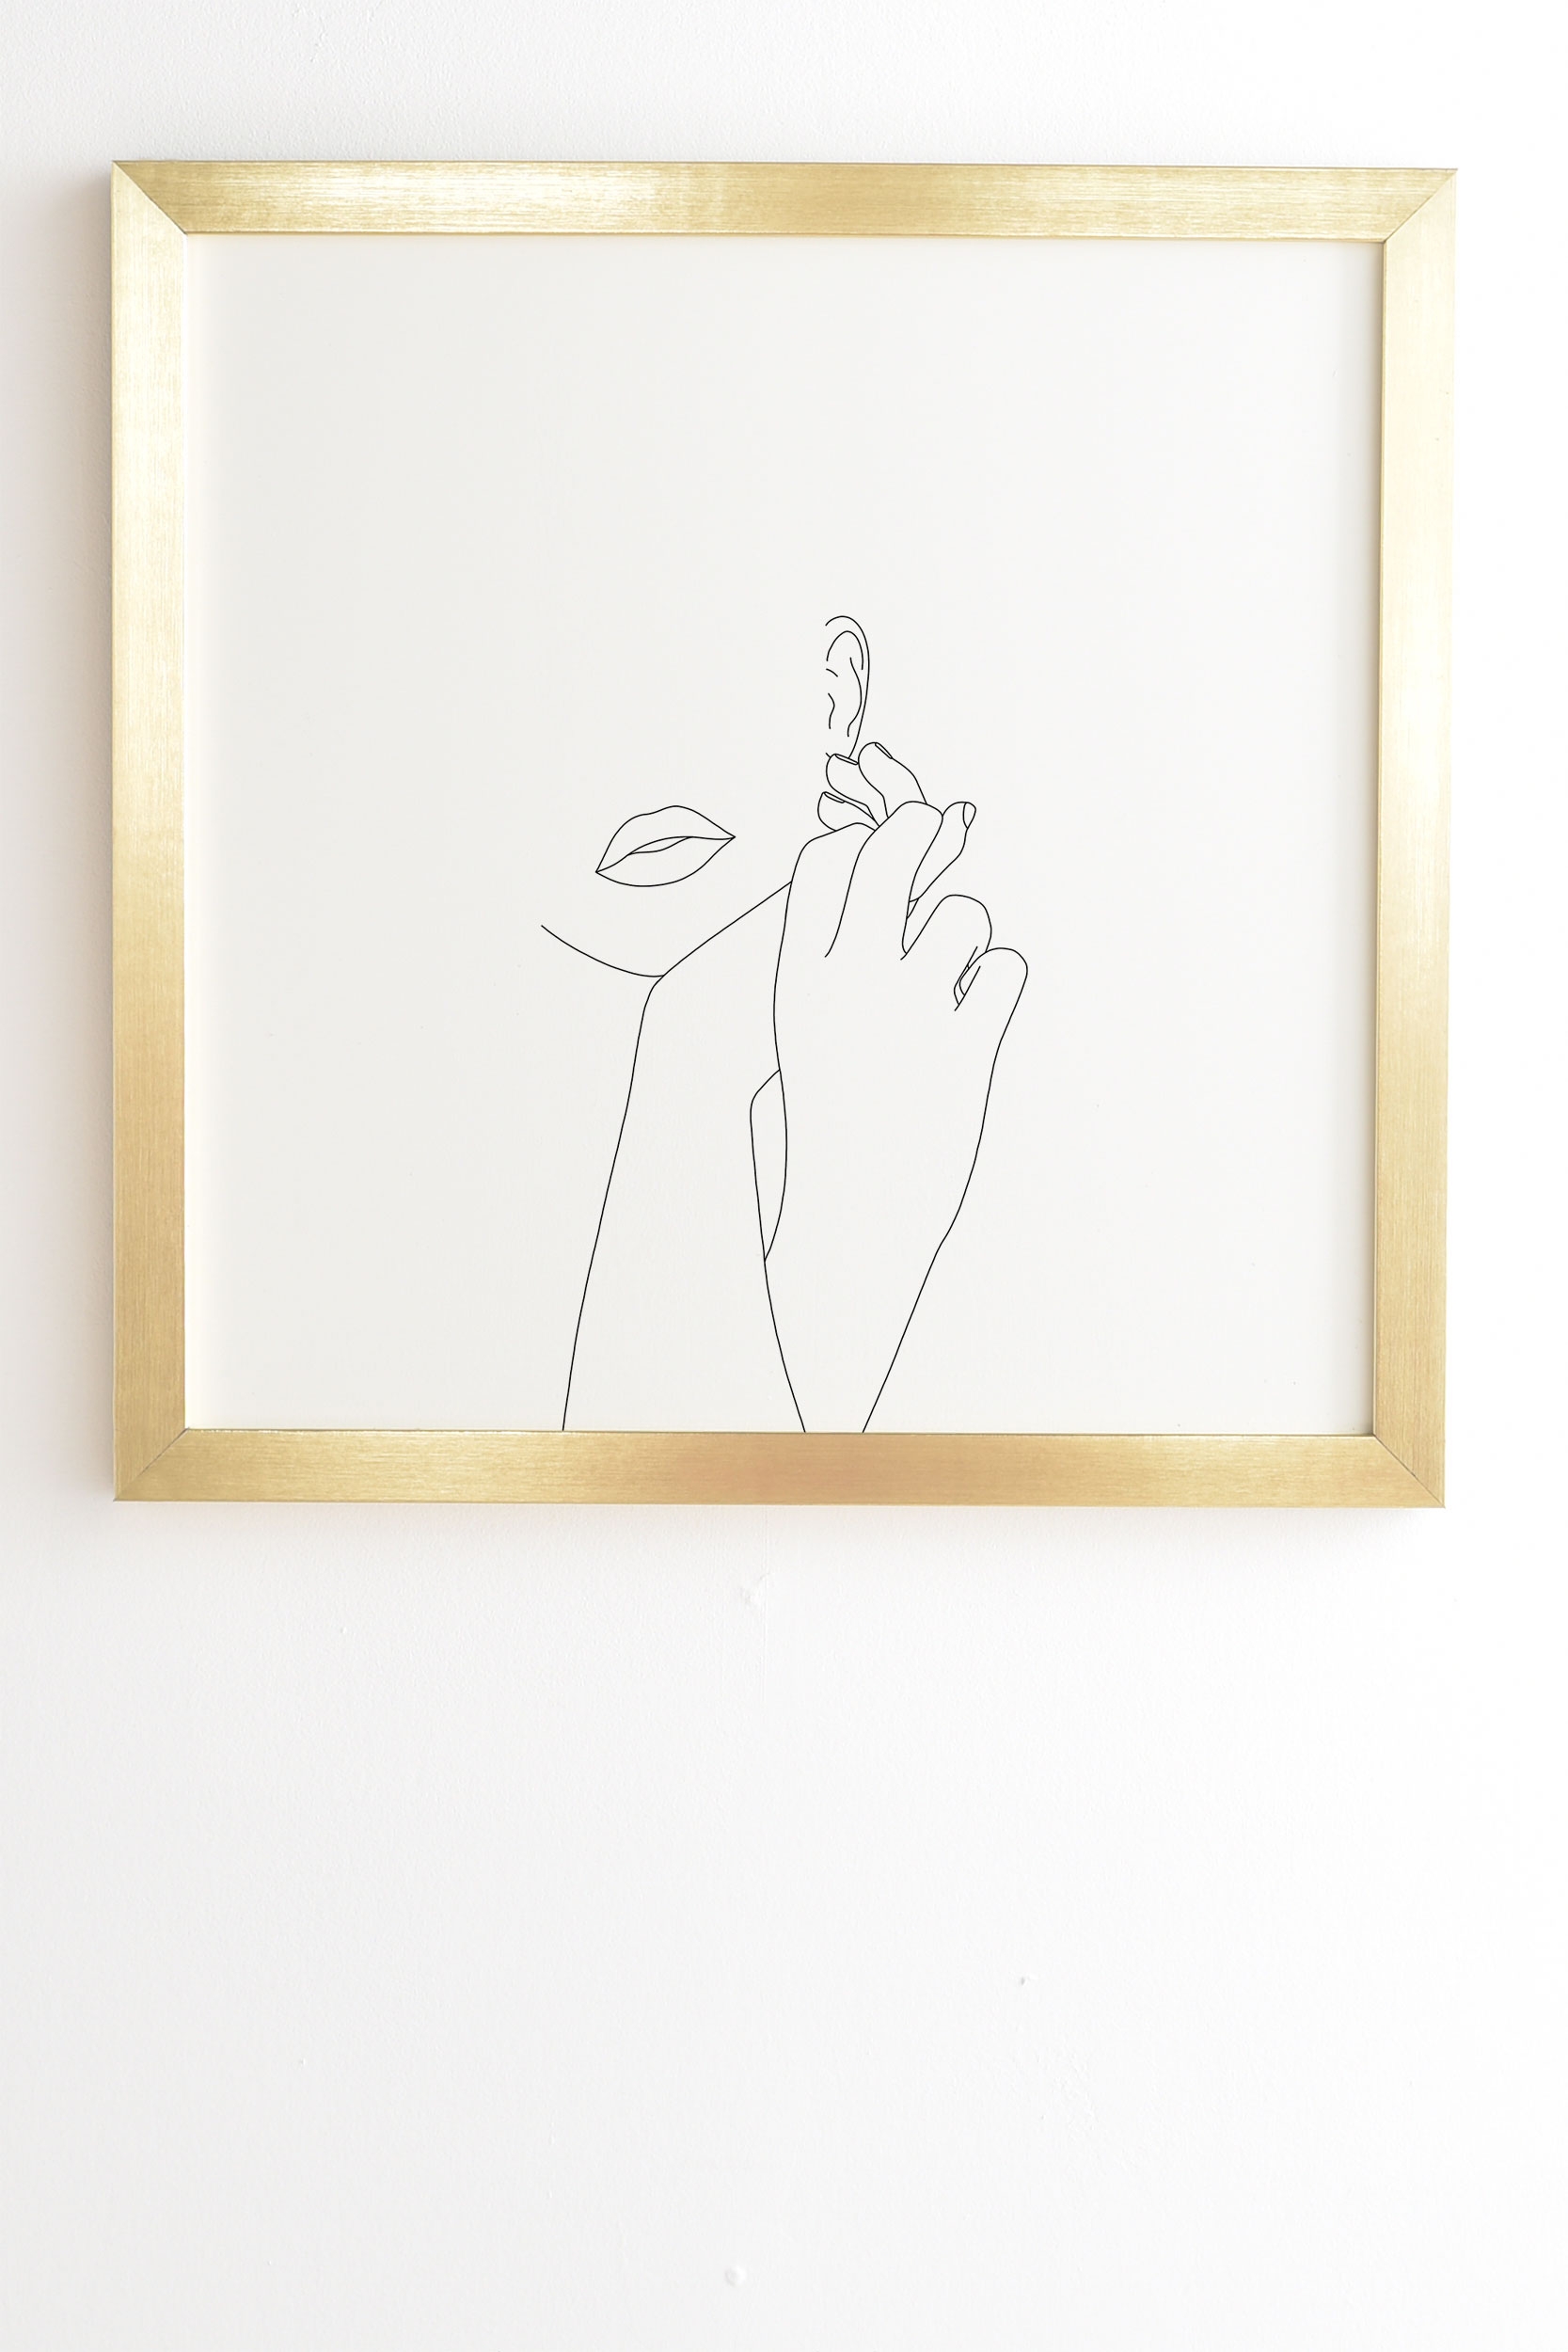 Minimalist Face Illustration by The Colour Study - Framed Wall Art Basic Gold 20" x 20" - Image 1